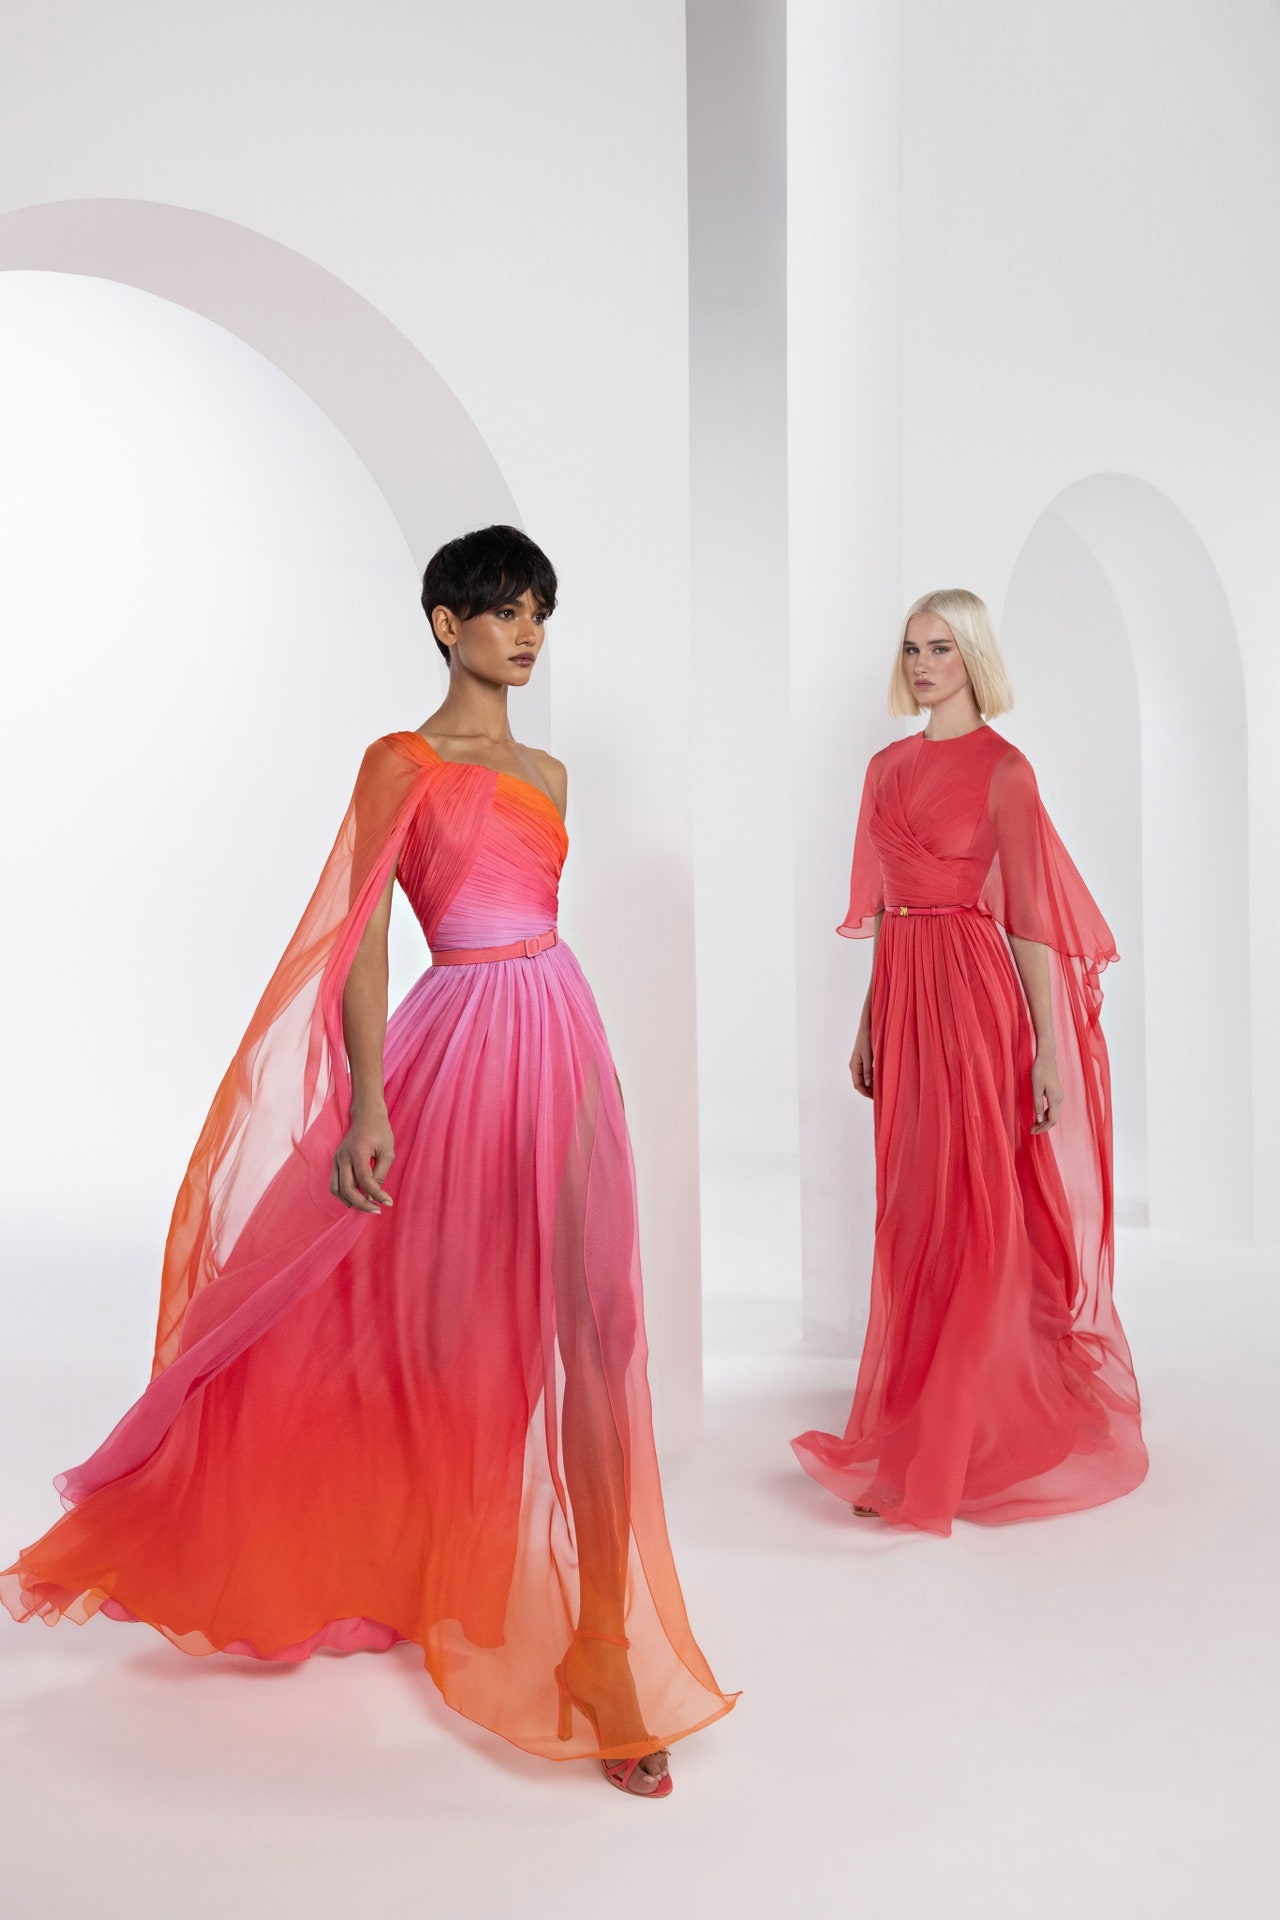 Photos: Zuhair Murad's ethereal gowns could dress a Disney princess – East  Bay Times